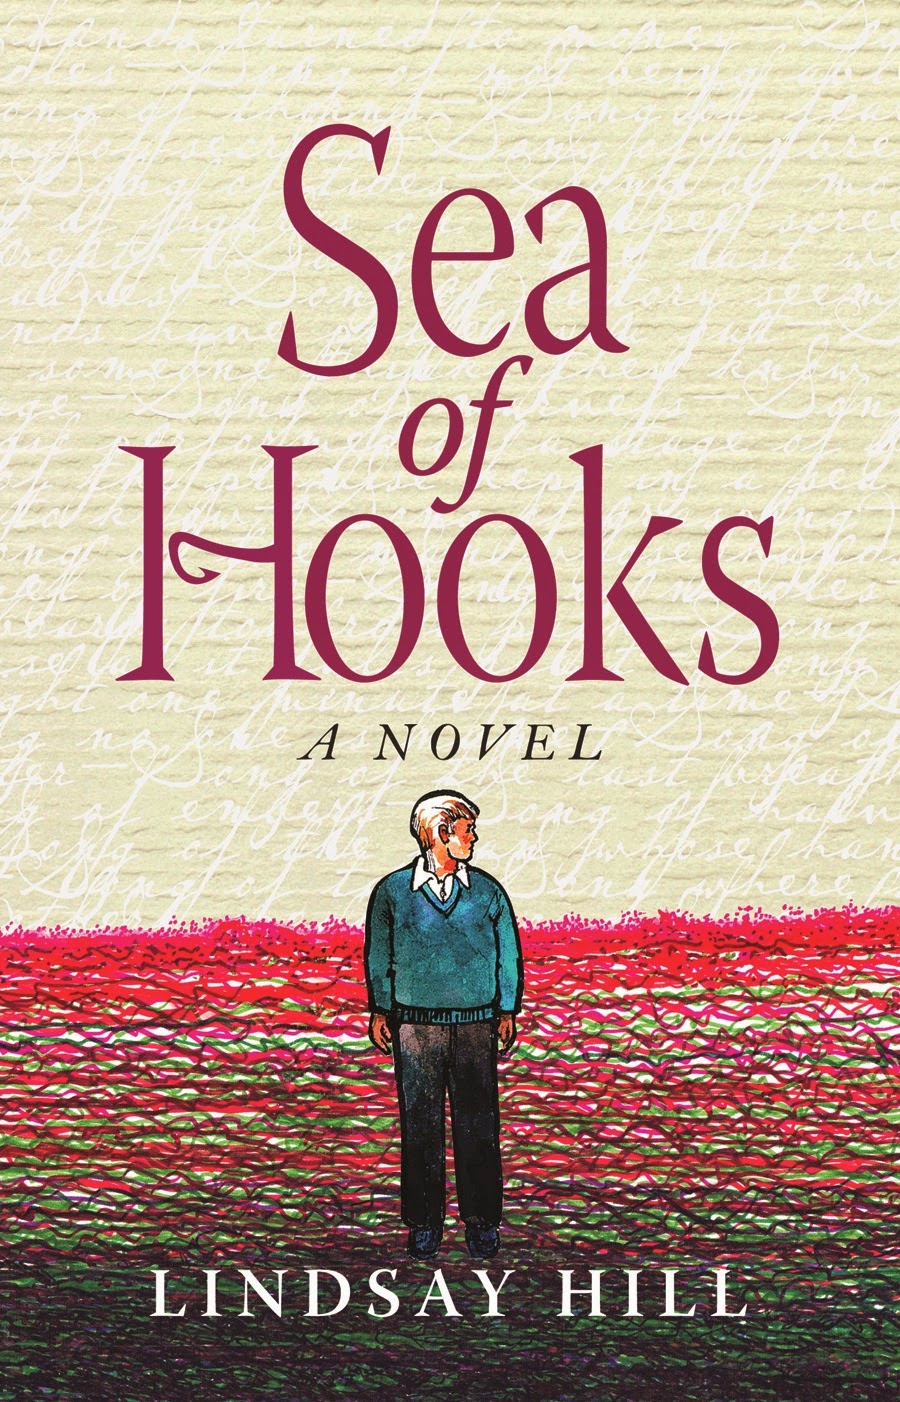 http://discover.halifaxpubliclibraries.ca/?q=title:sea%20of%20hooks